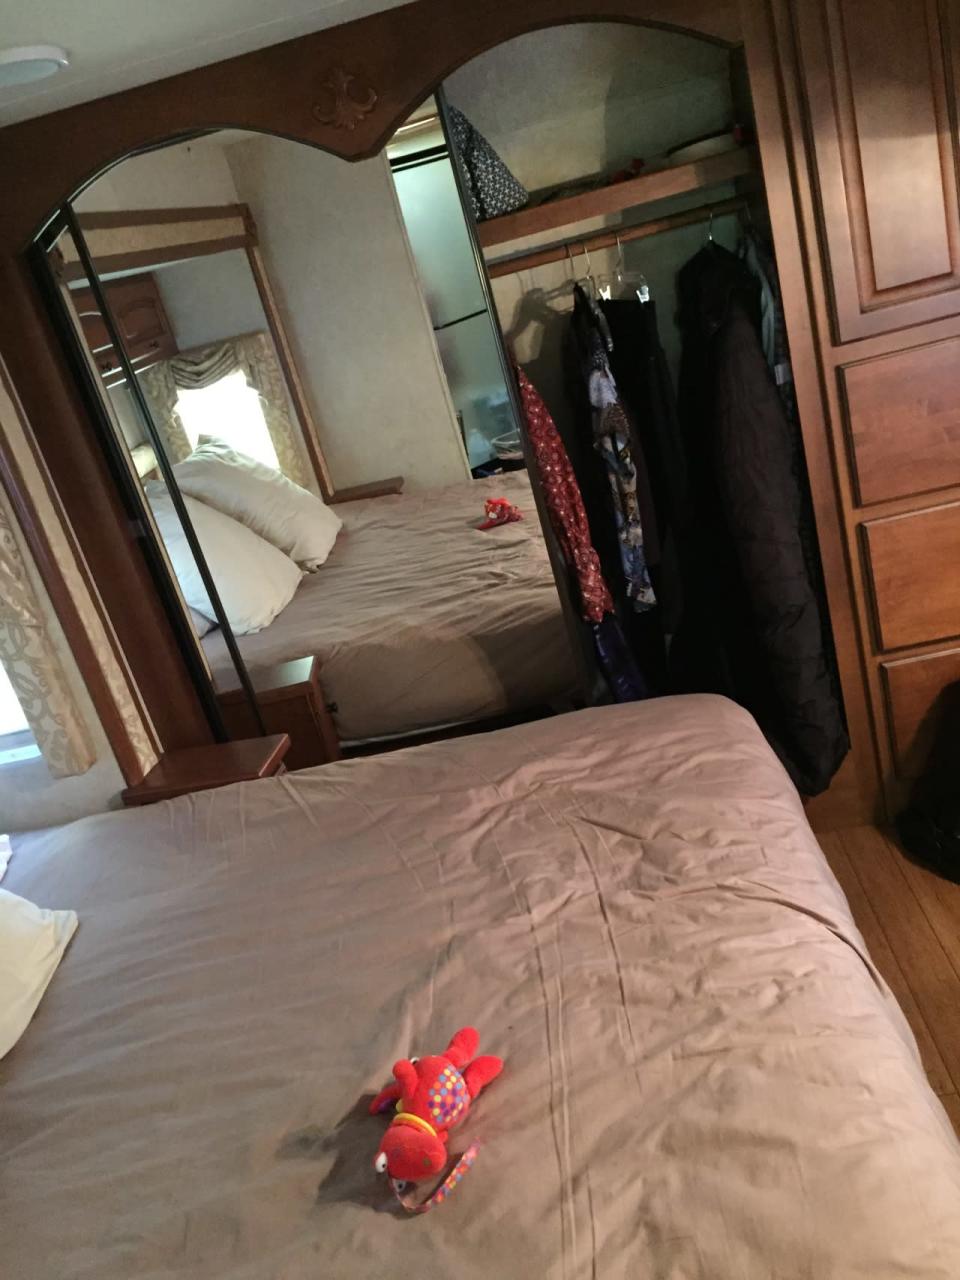 <p>“This is my trailer in the morning. A baby toy with my costume hung up.”<br></p>